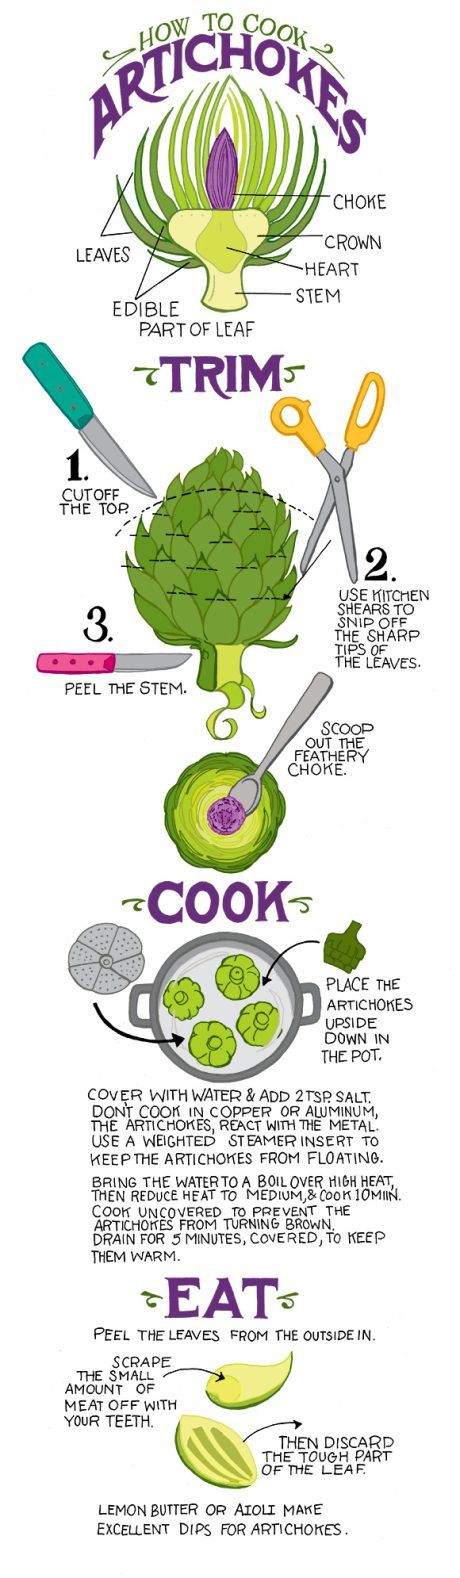 How to Cook & Eat Artichokes Yeah, I was that person in a restaurant chewing on an artichoke section without squeezing out the